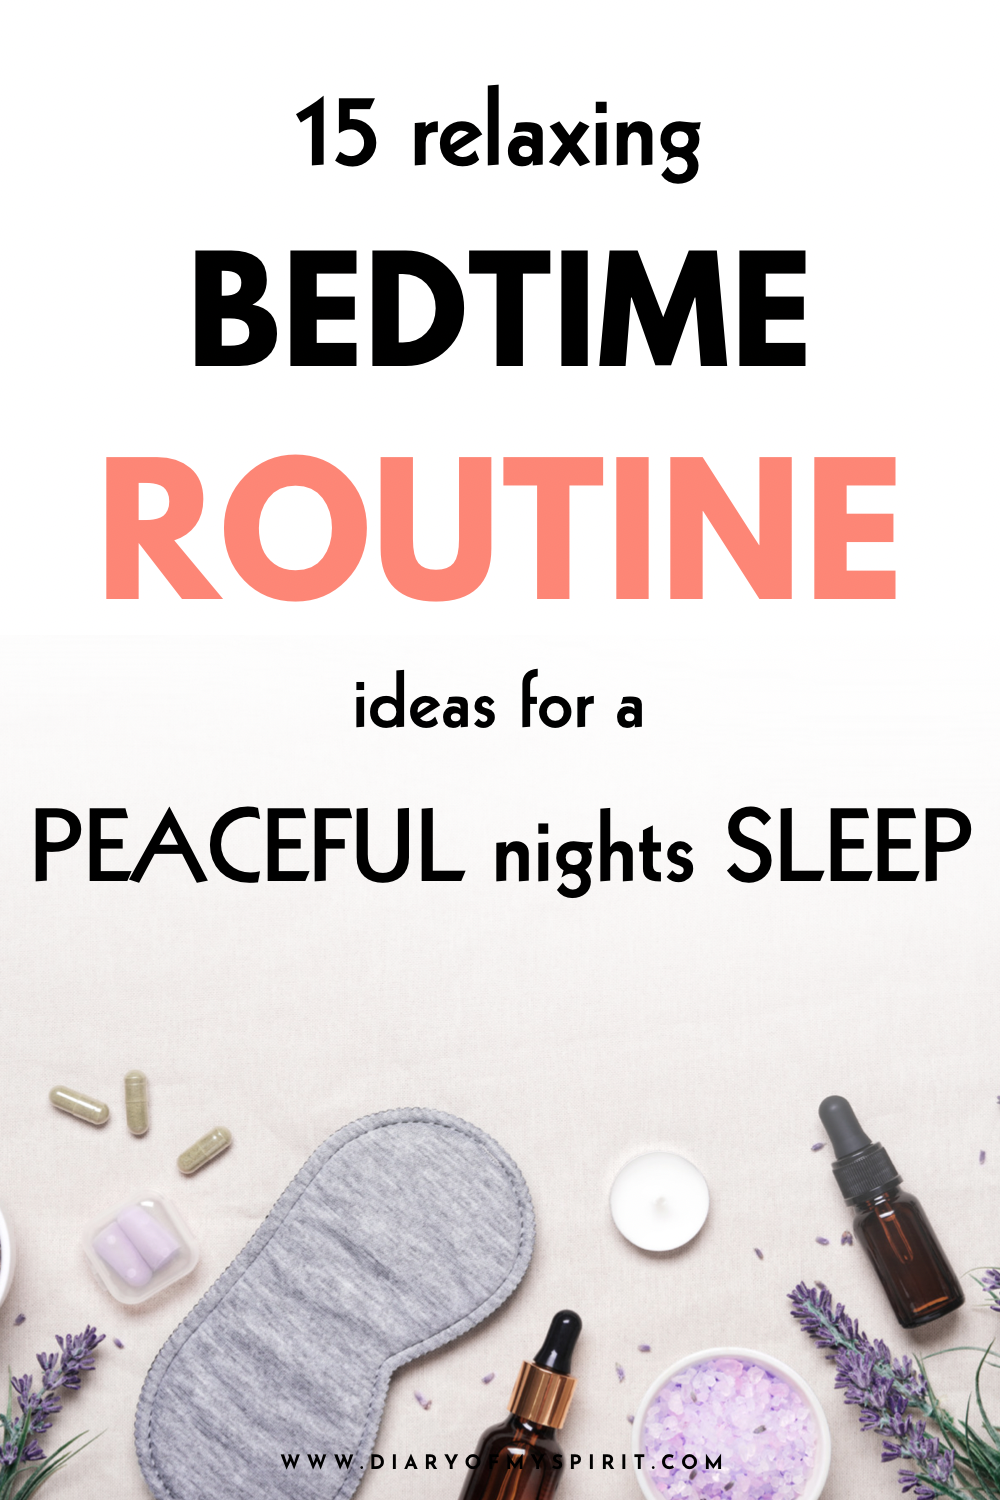 nighttime routine ideas. evening routine ritual. bedtime routine checklist. nighttime skincare routines. Tips for better sleep